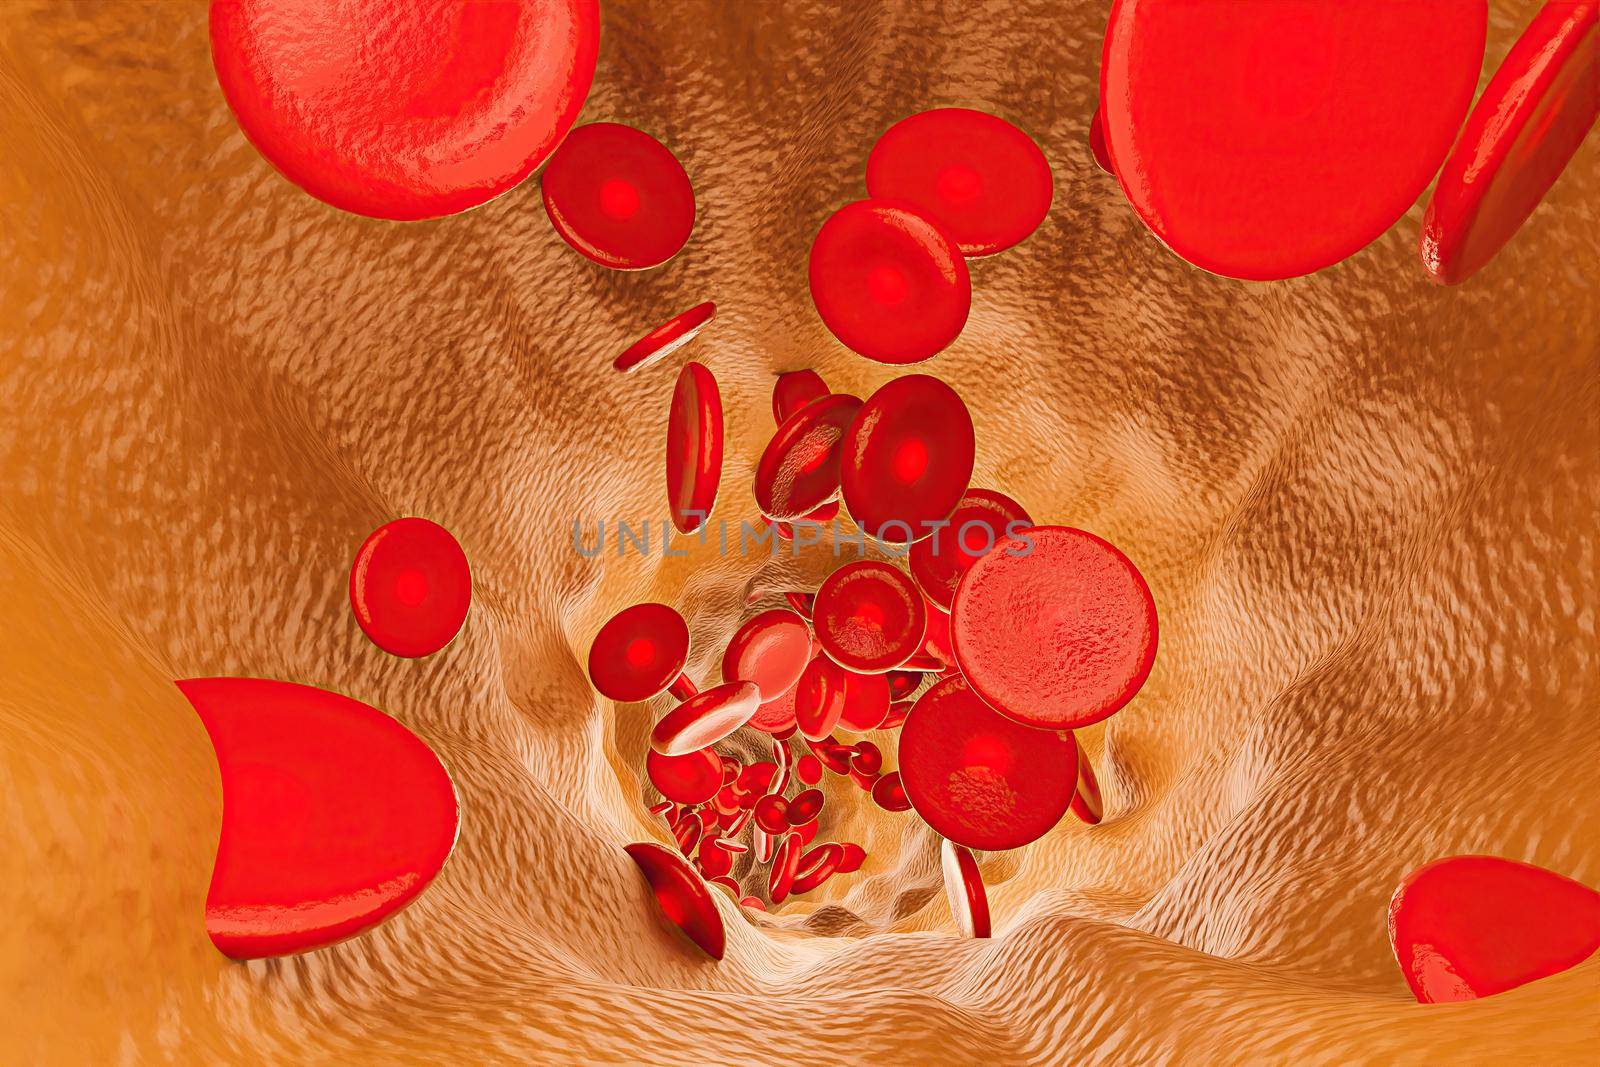 interior of a vein with cholesterol and red blood cells by asolano